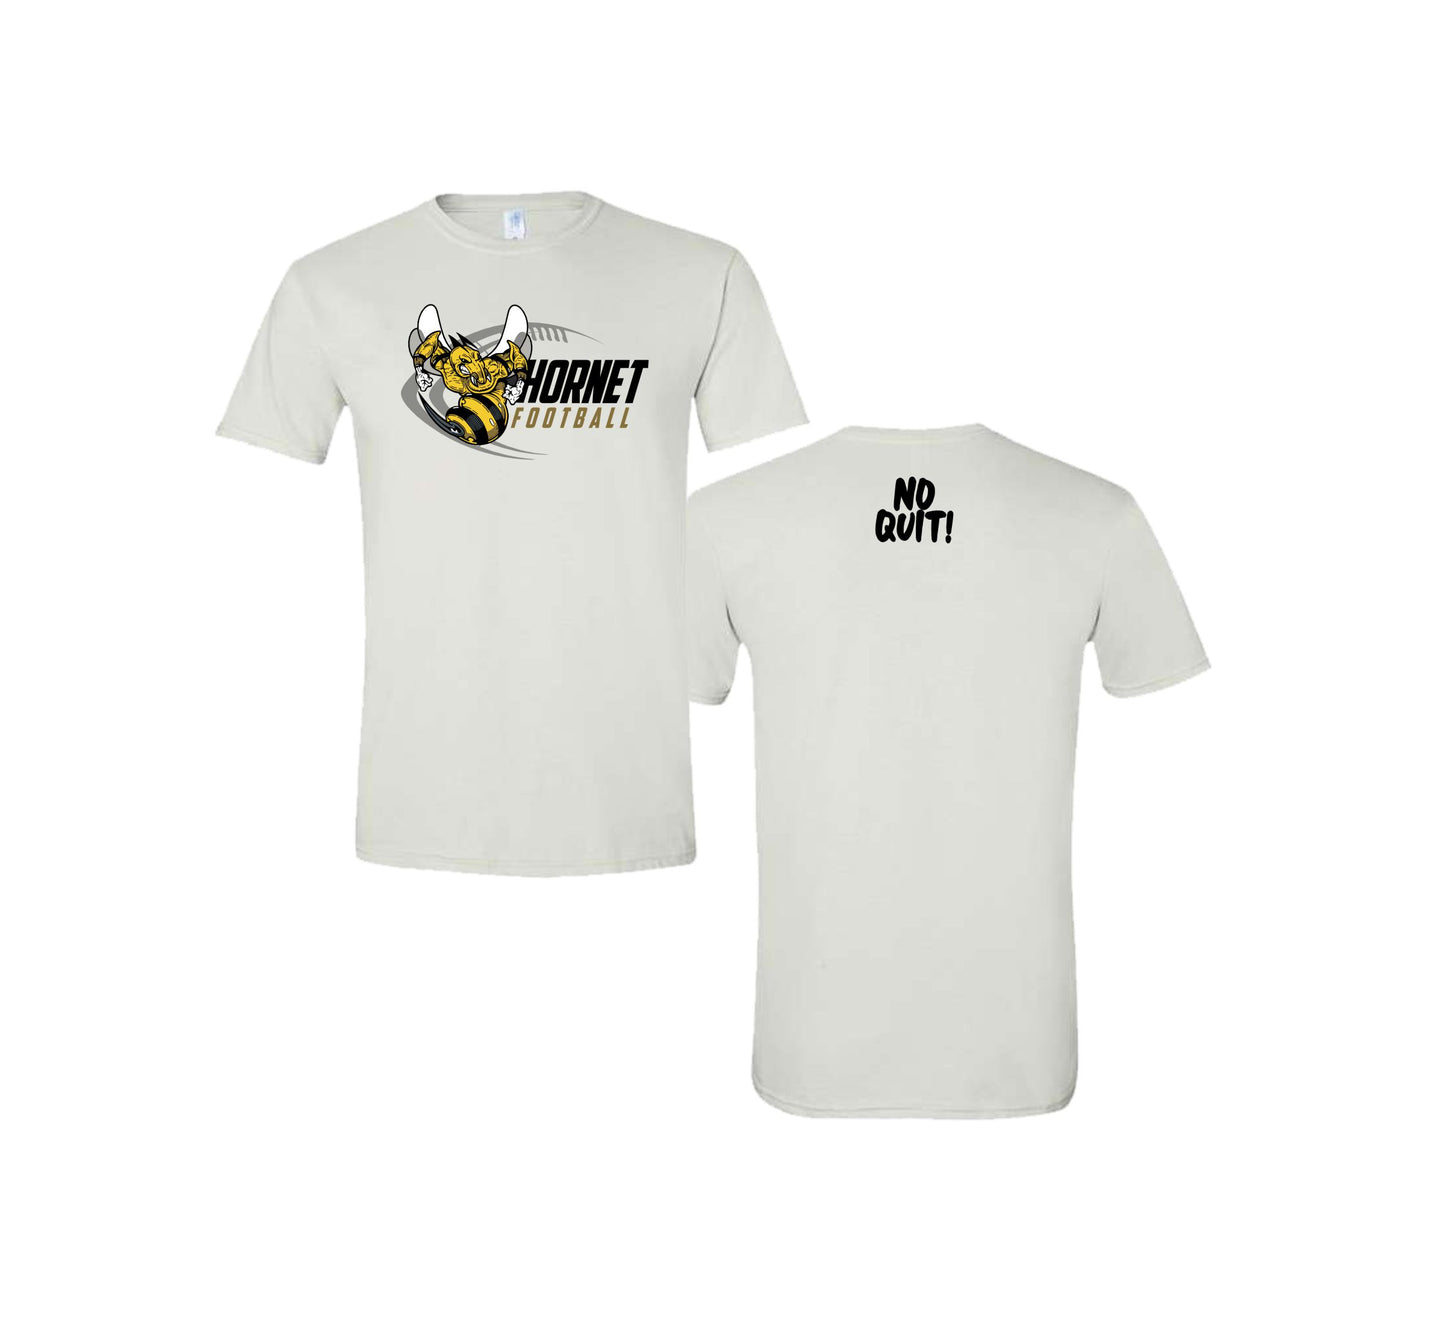 HORNET FOOTBALL - 36592918  (WHITE) - (CAN BE CUSTOMIZED)